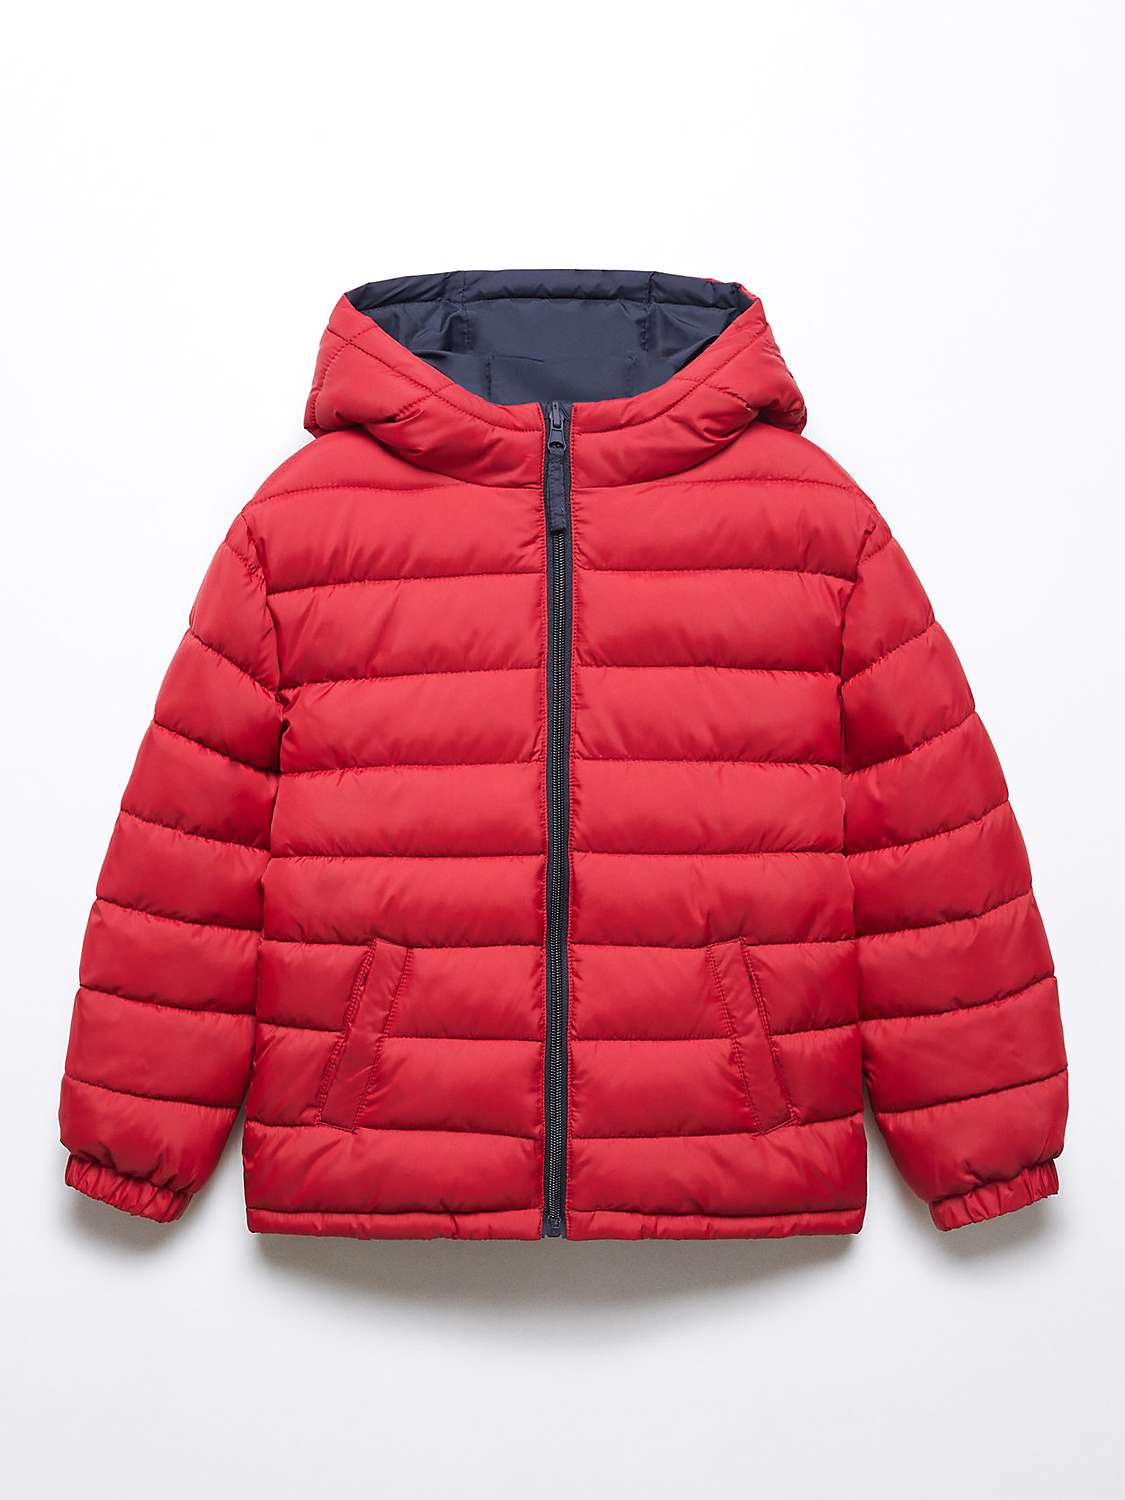 Buy Mango Kids' Paco Reversible Quilted Hooded Anorak, Red/Navy Online at johnlewis.com